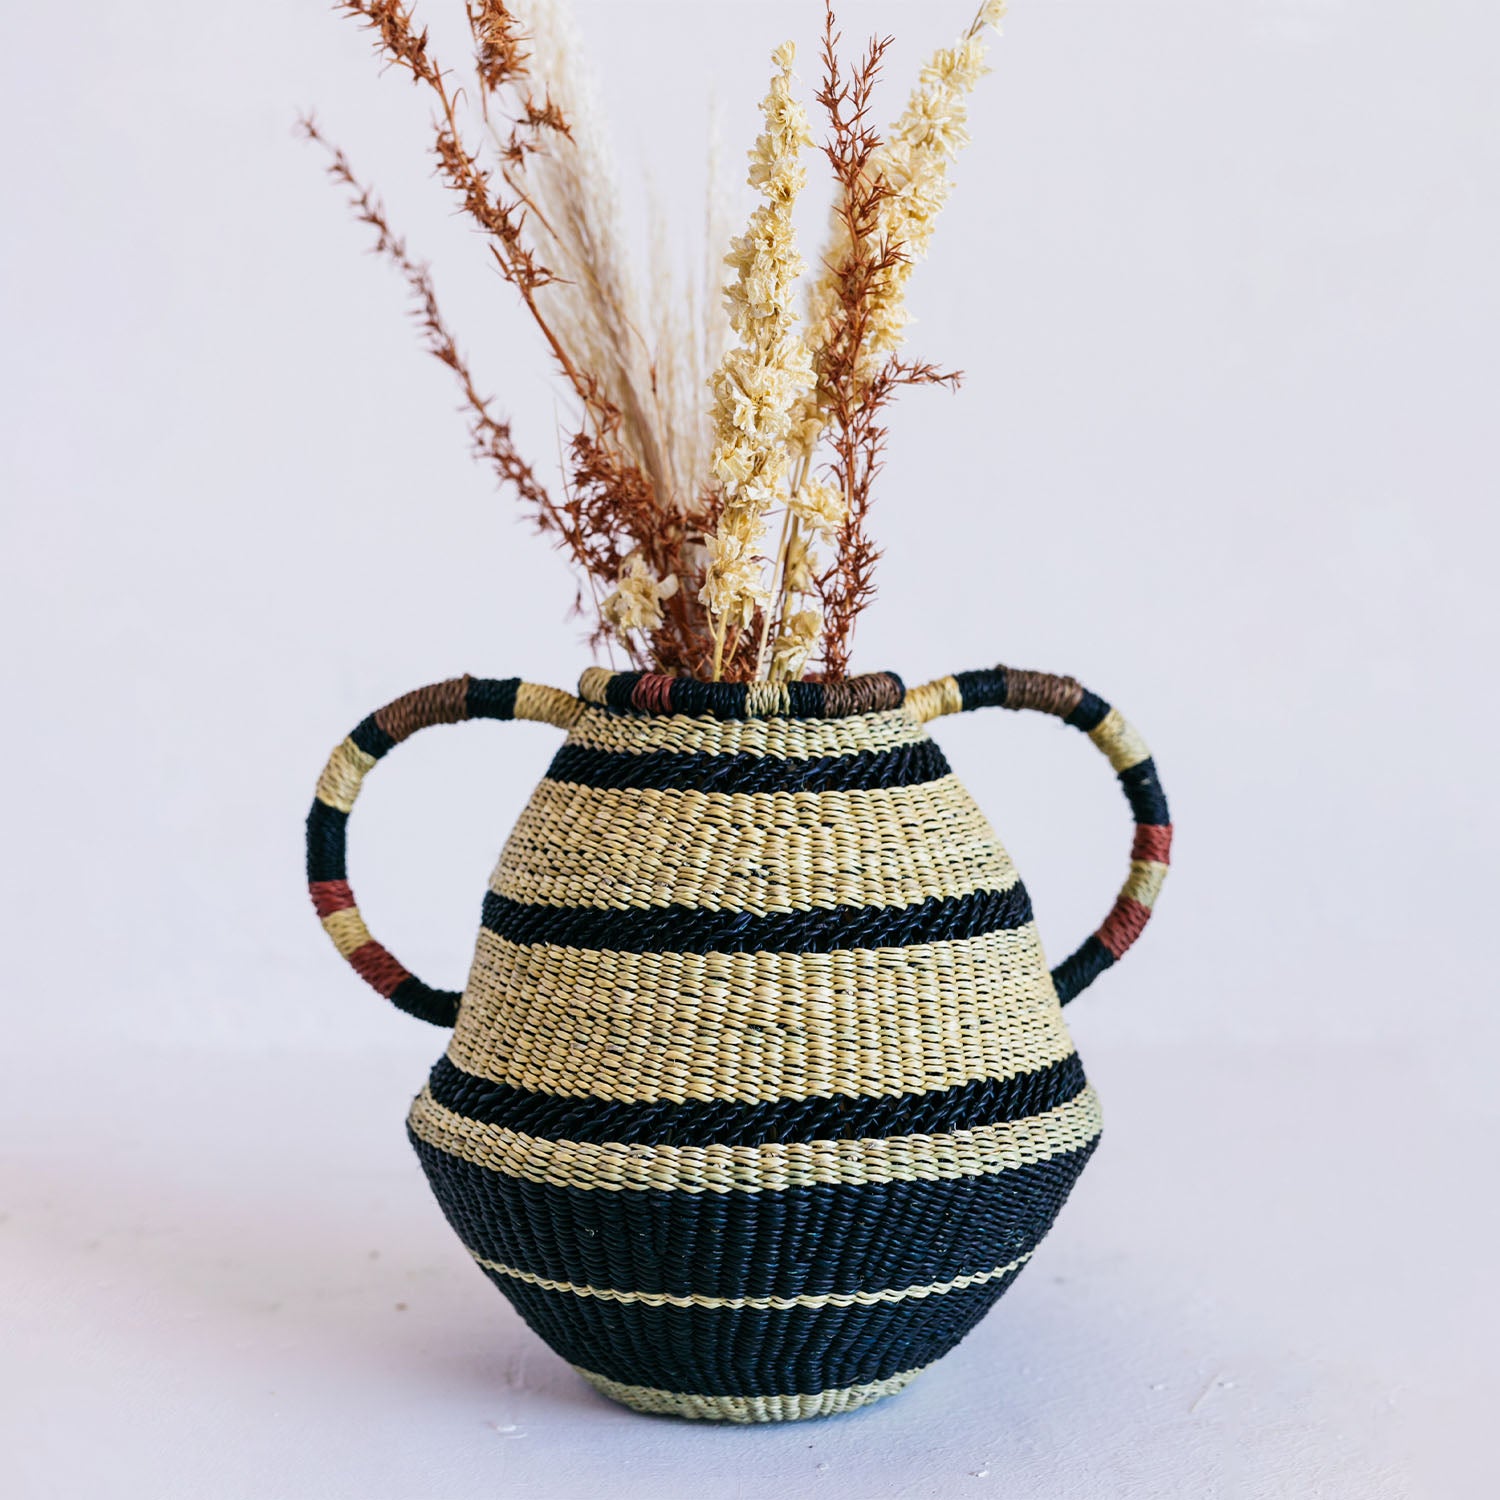 Handcrafted woven basket adorned with striped pattern holds dried flora.